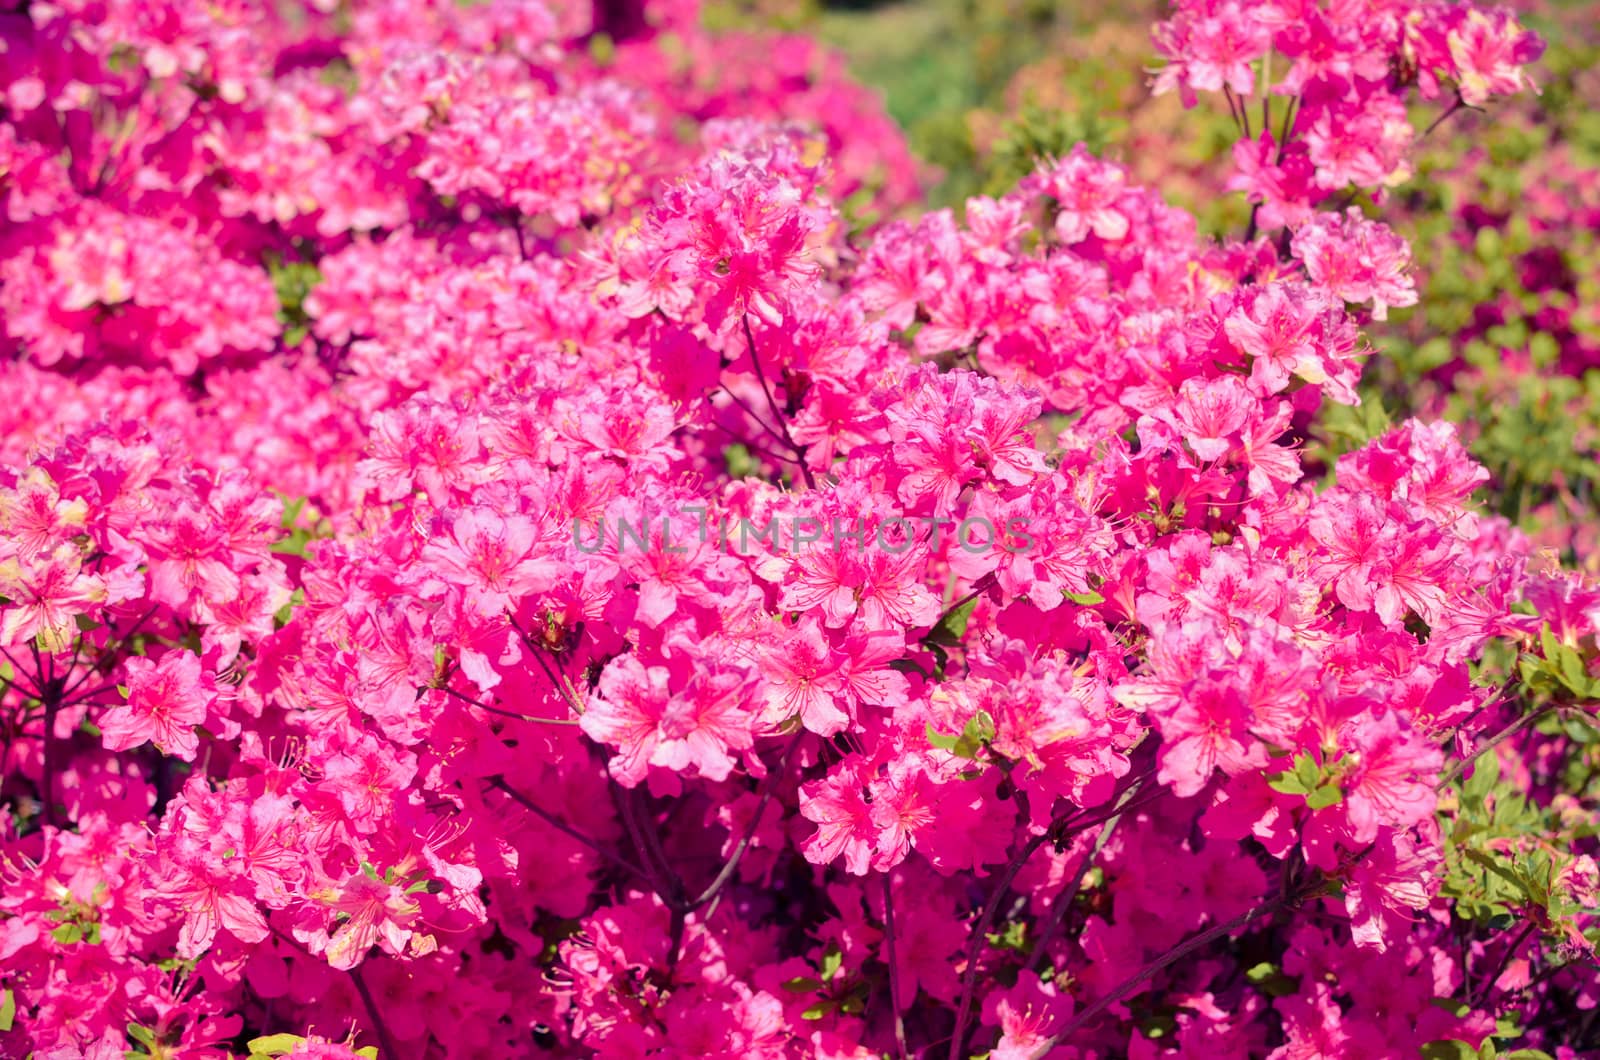 Blooming meadow with pink flowers of rhododendron bushes. Kyiv, Ukraine